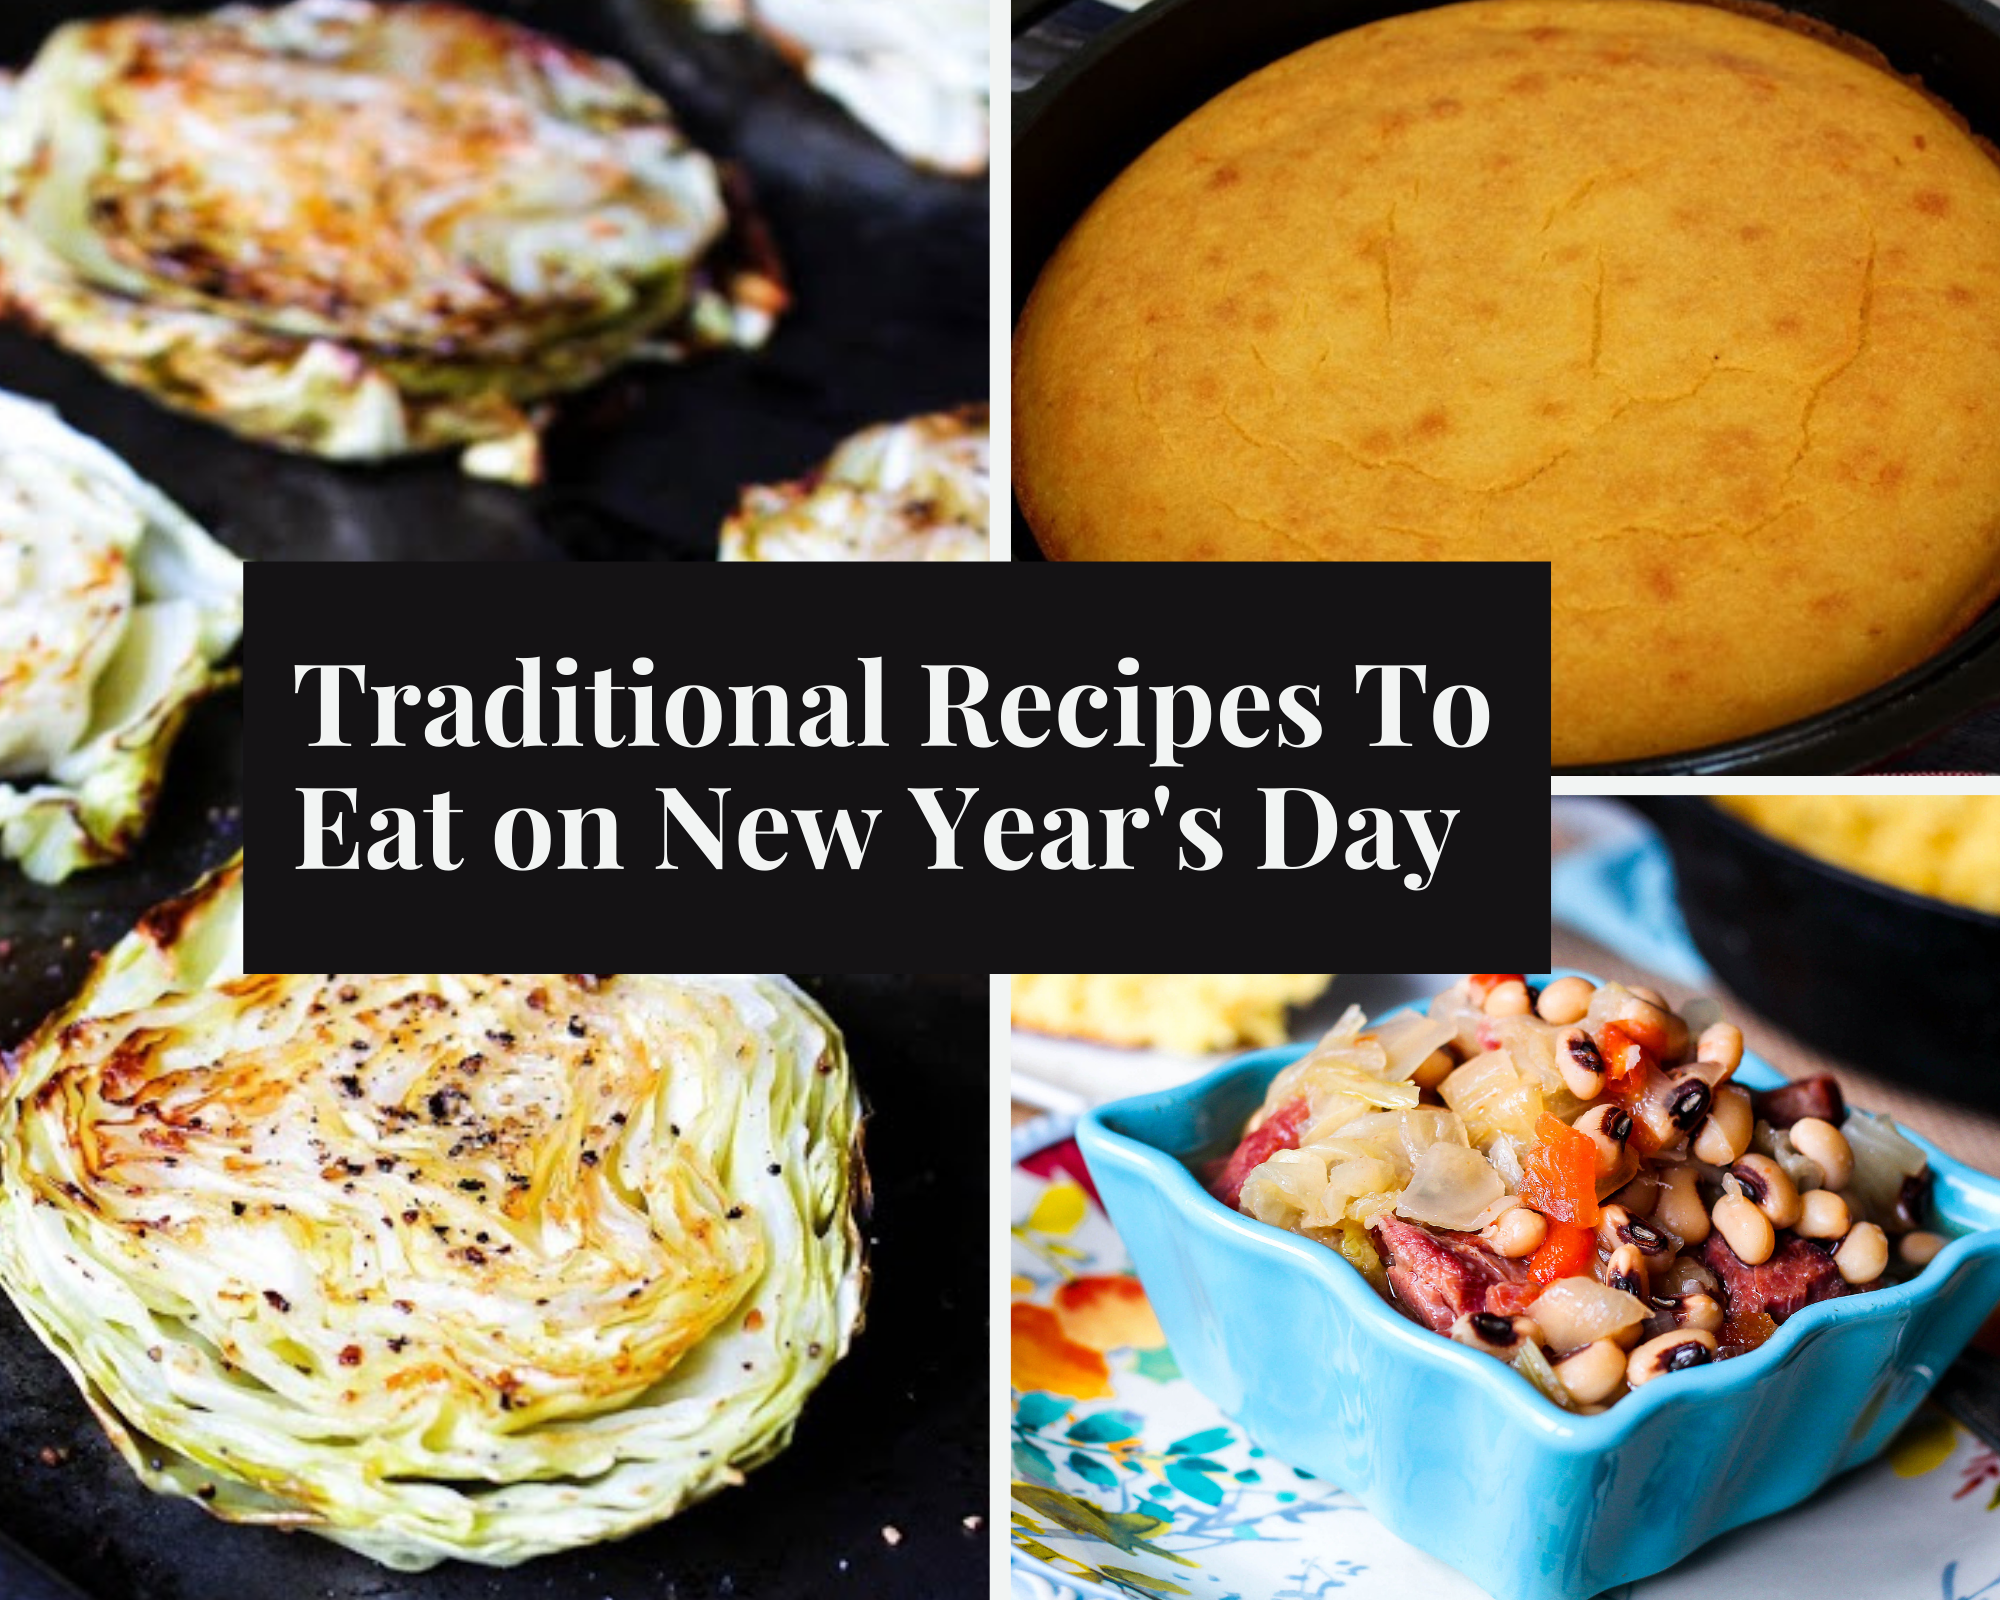 Traditional Recipes To Eat on New Year’s Day